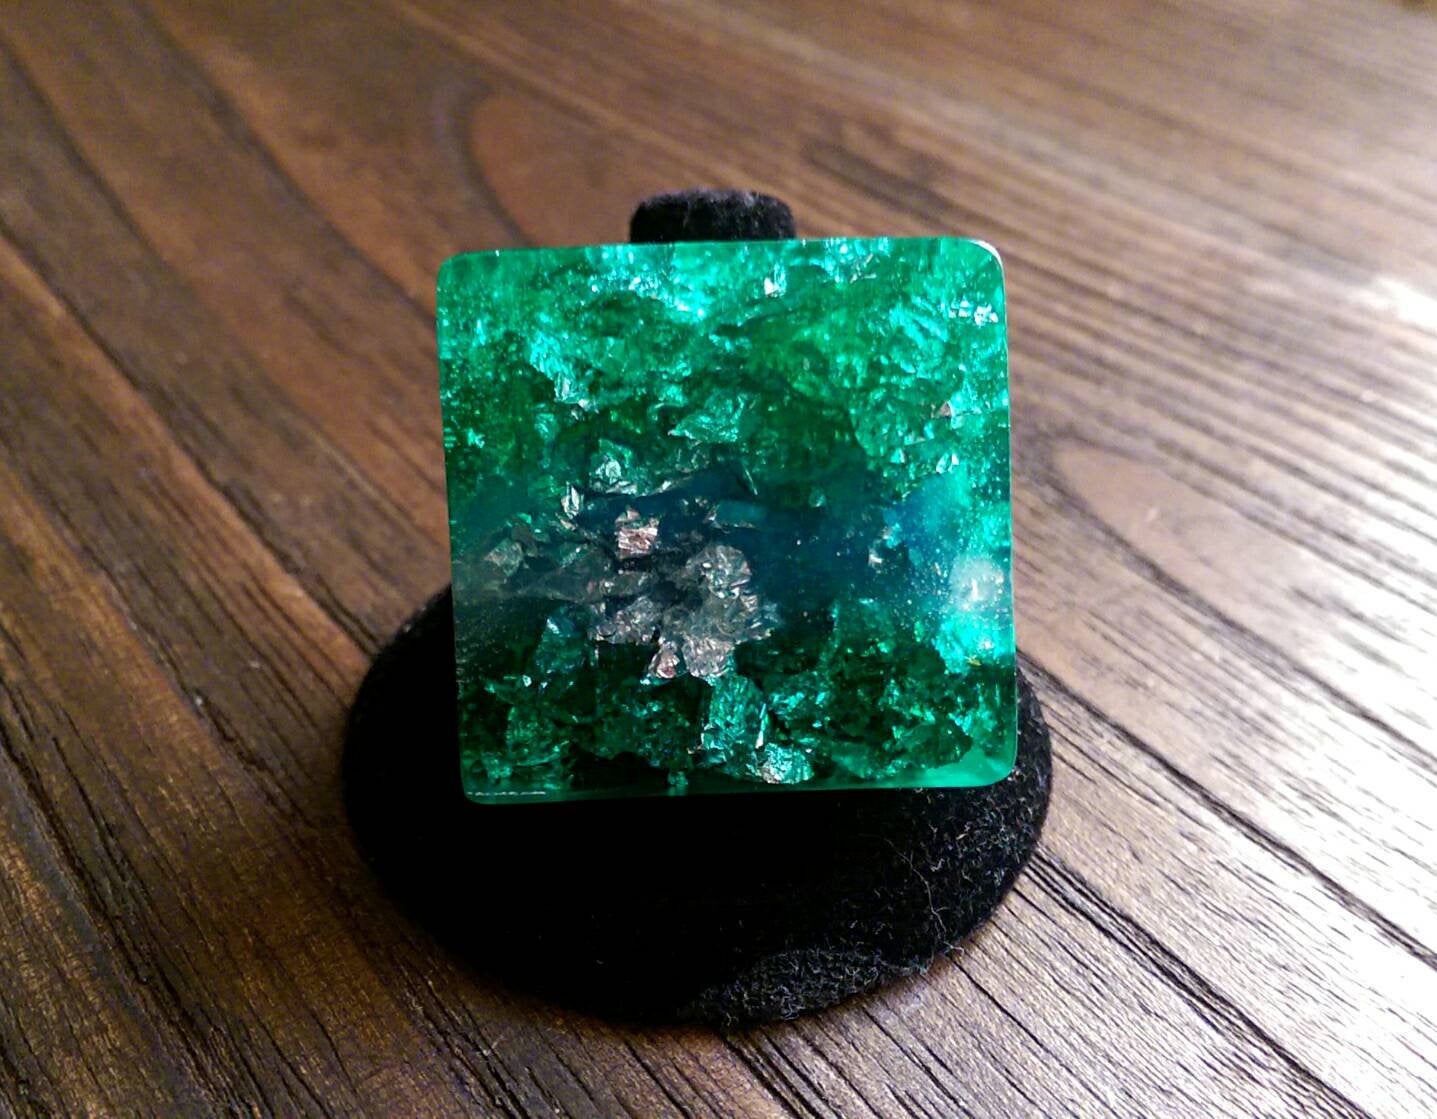 Statement Square Resin Ring, Handmade Size 7 US N AU. Green Blue Silver Leaf Ring